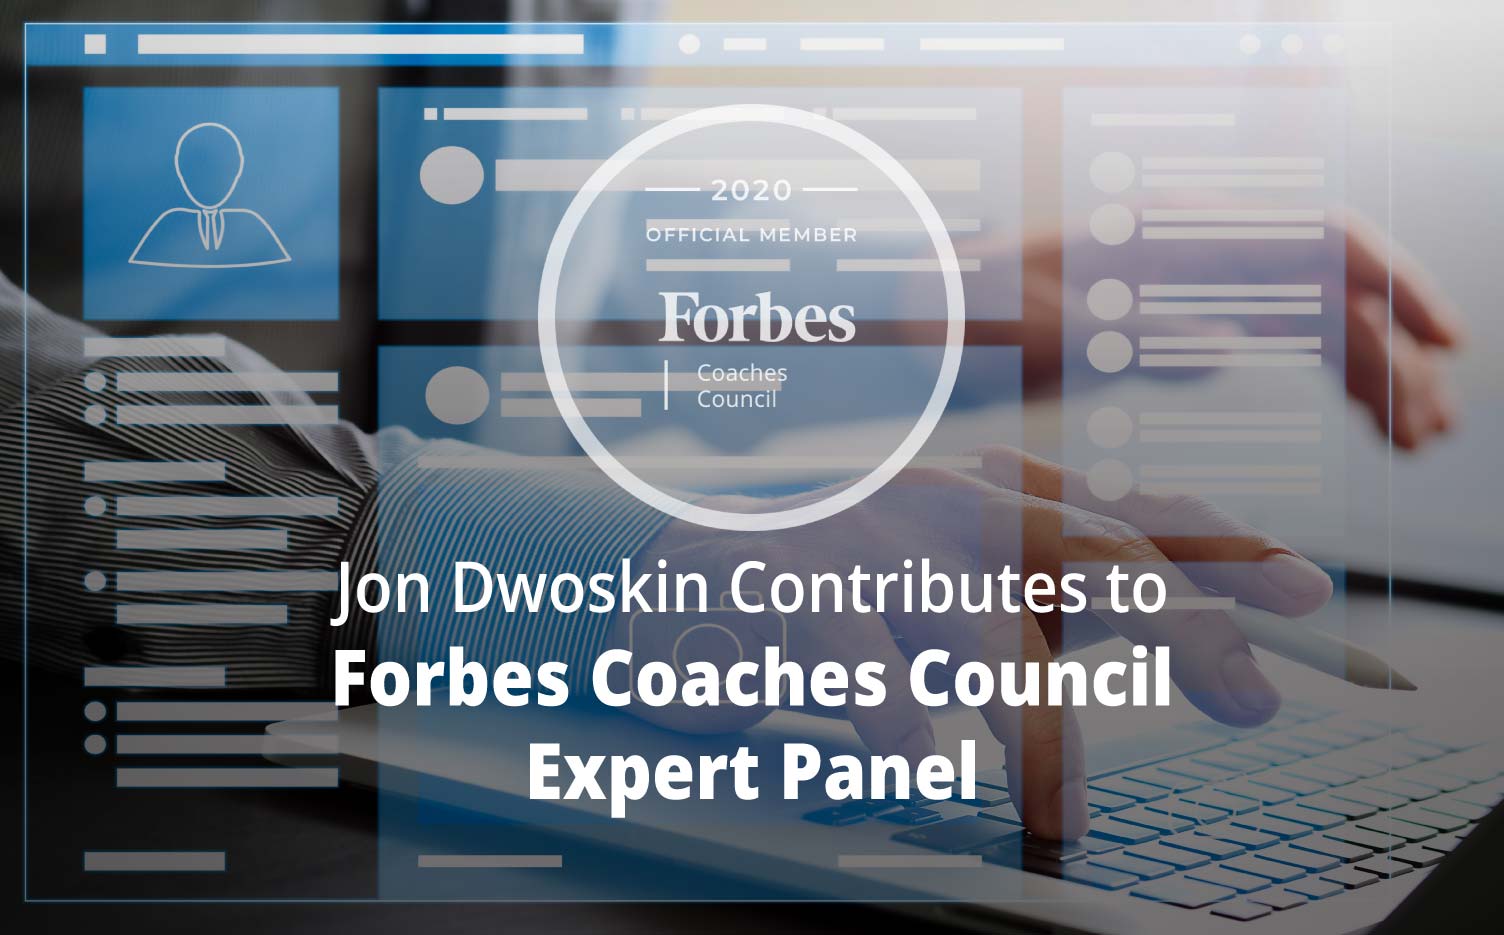 Jon Contributes to Forbes Coaches Council Expert Panel: 11 Emerging LinkedIn Trends And How To Prepare For Them